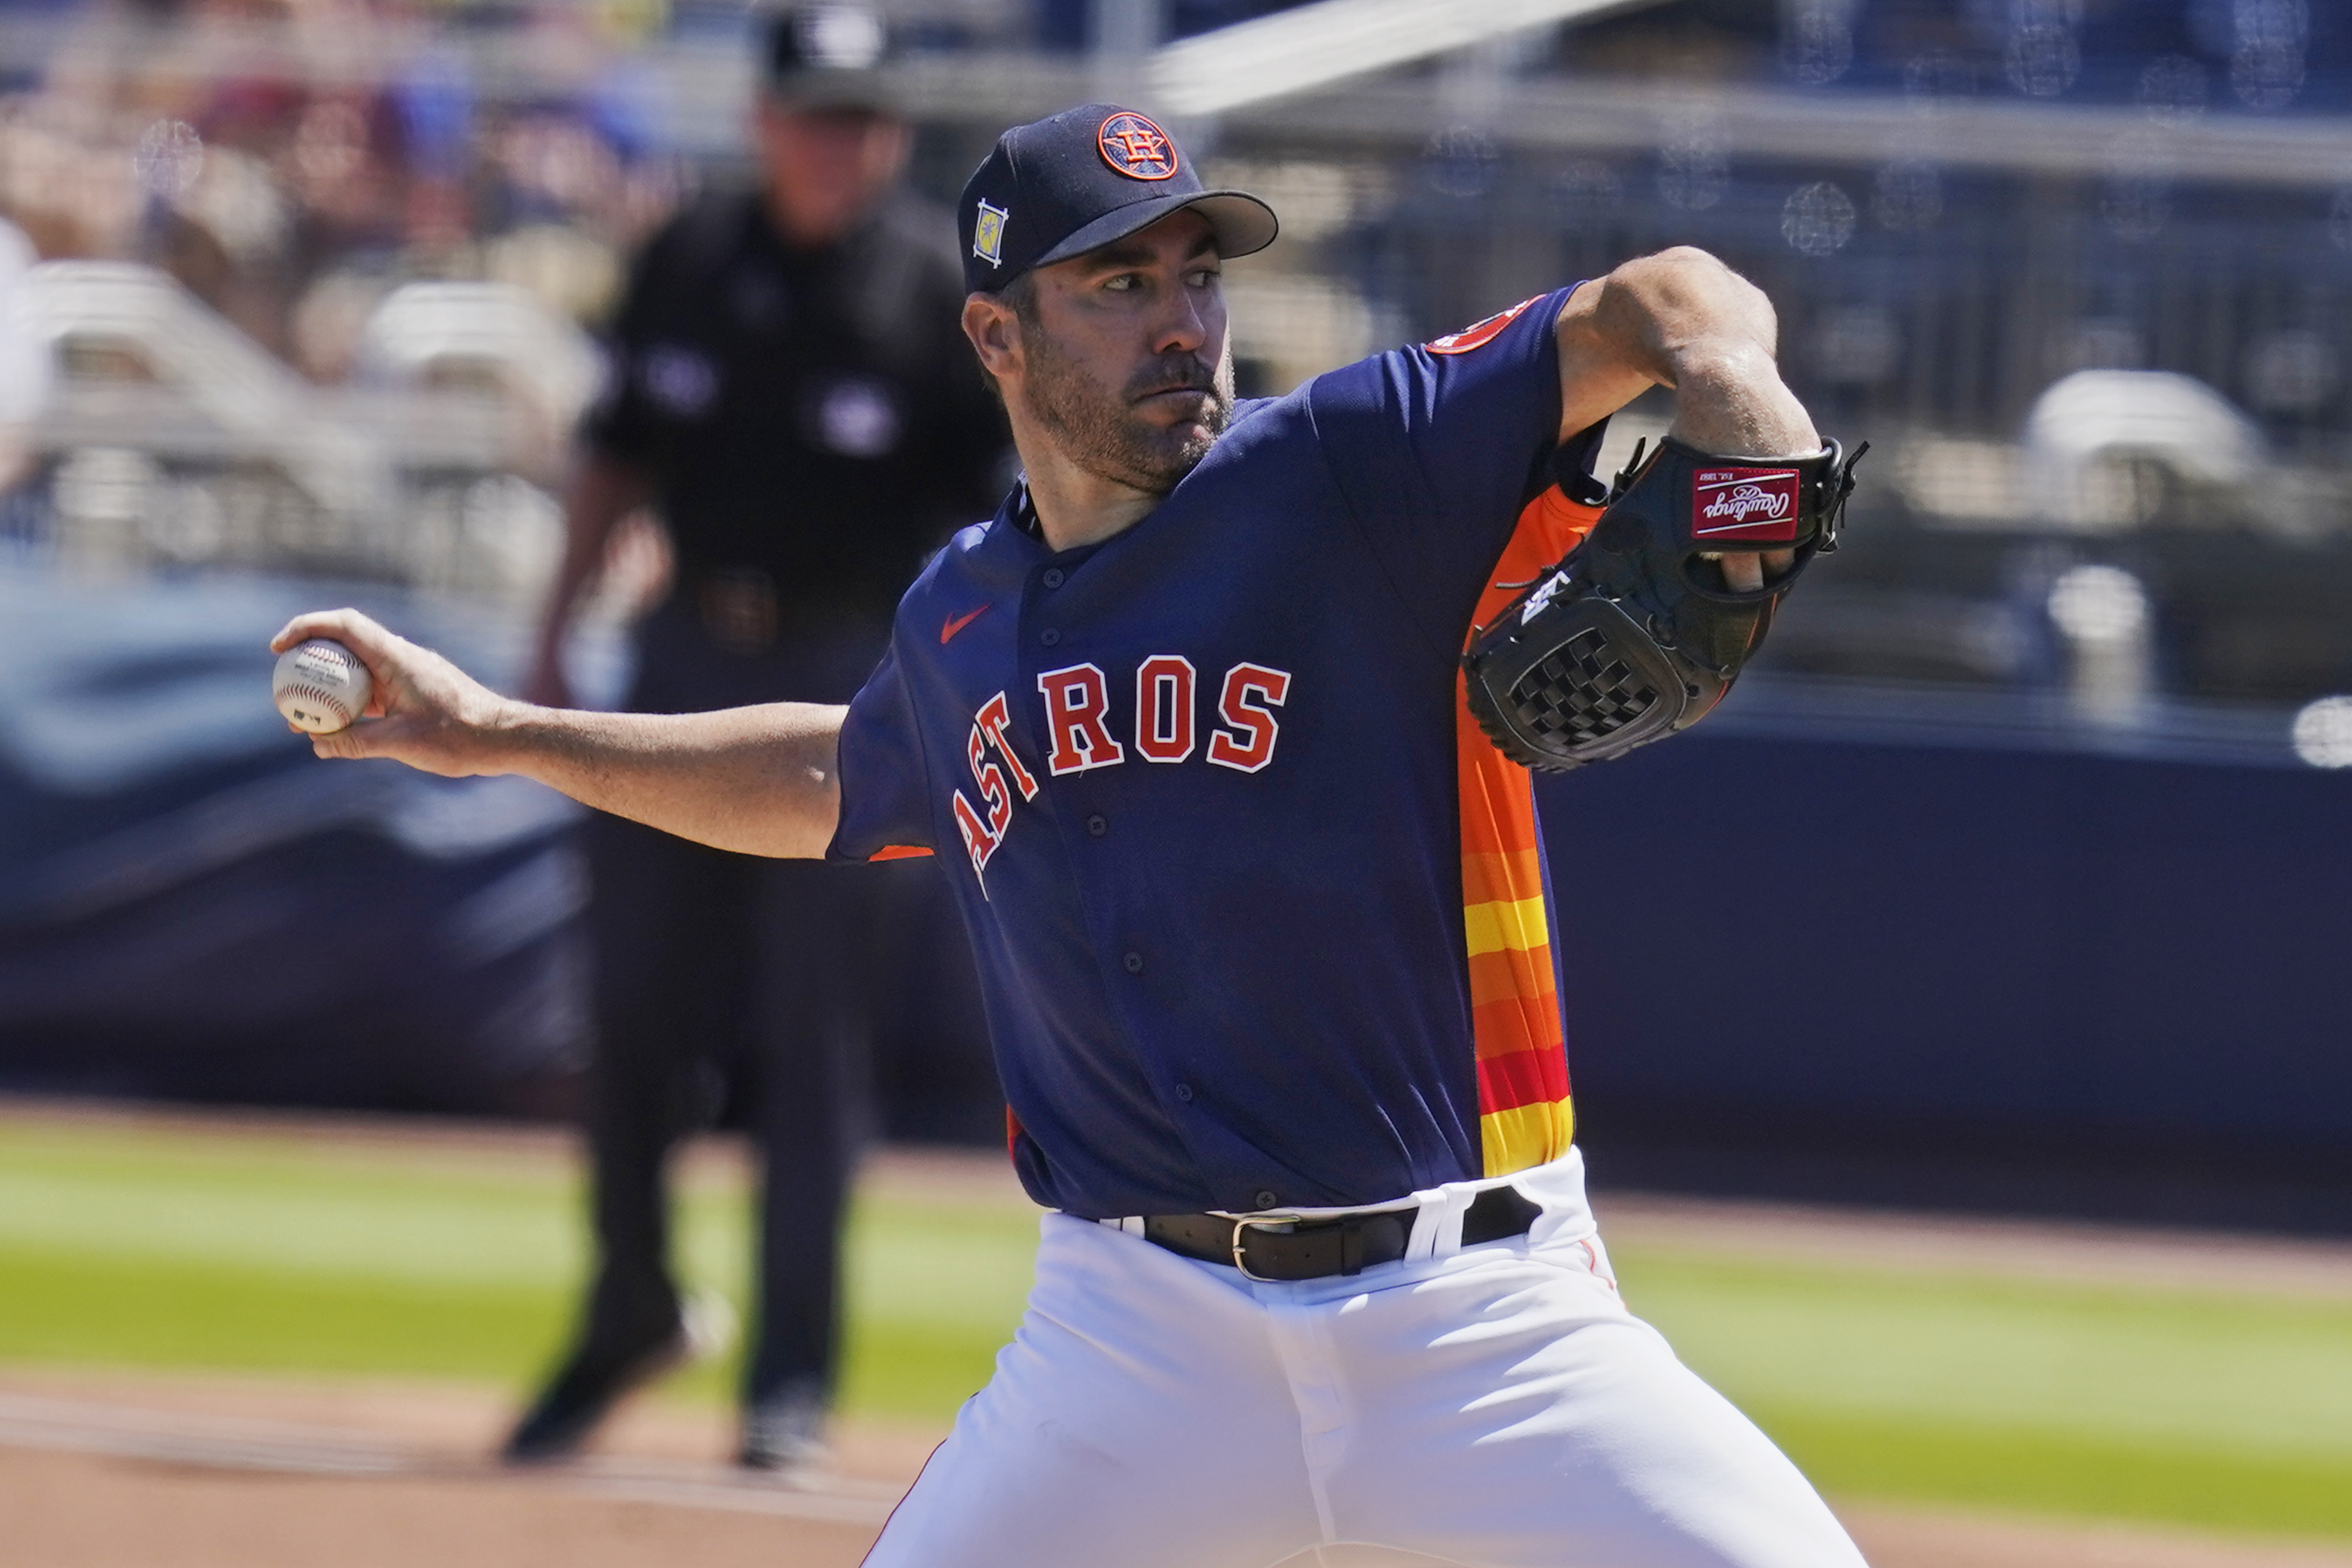 LEADING OFF: Verlander pitches as Astros face Twins, Correa